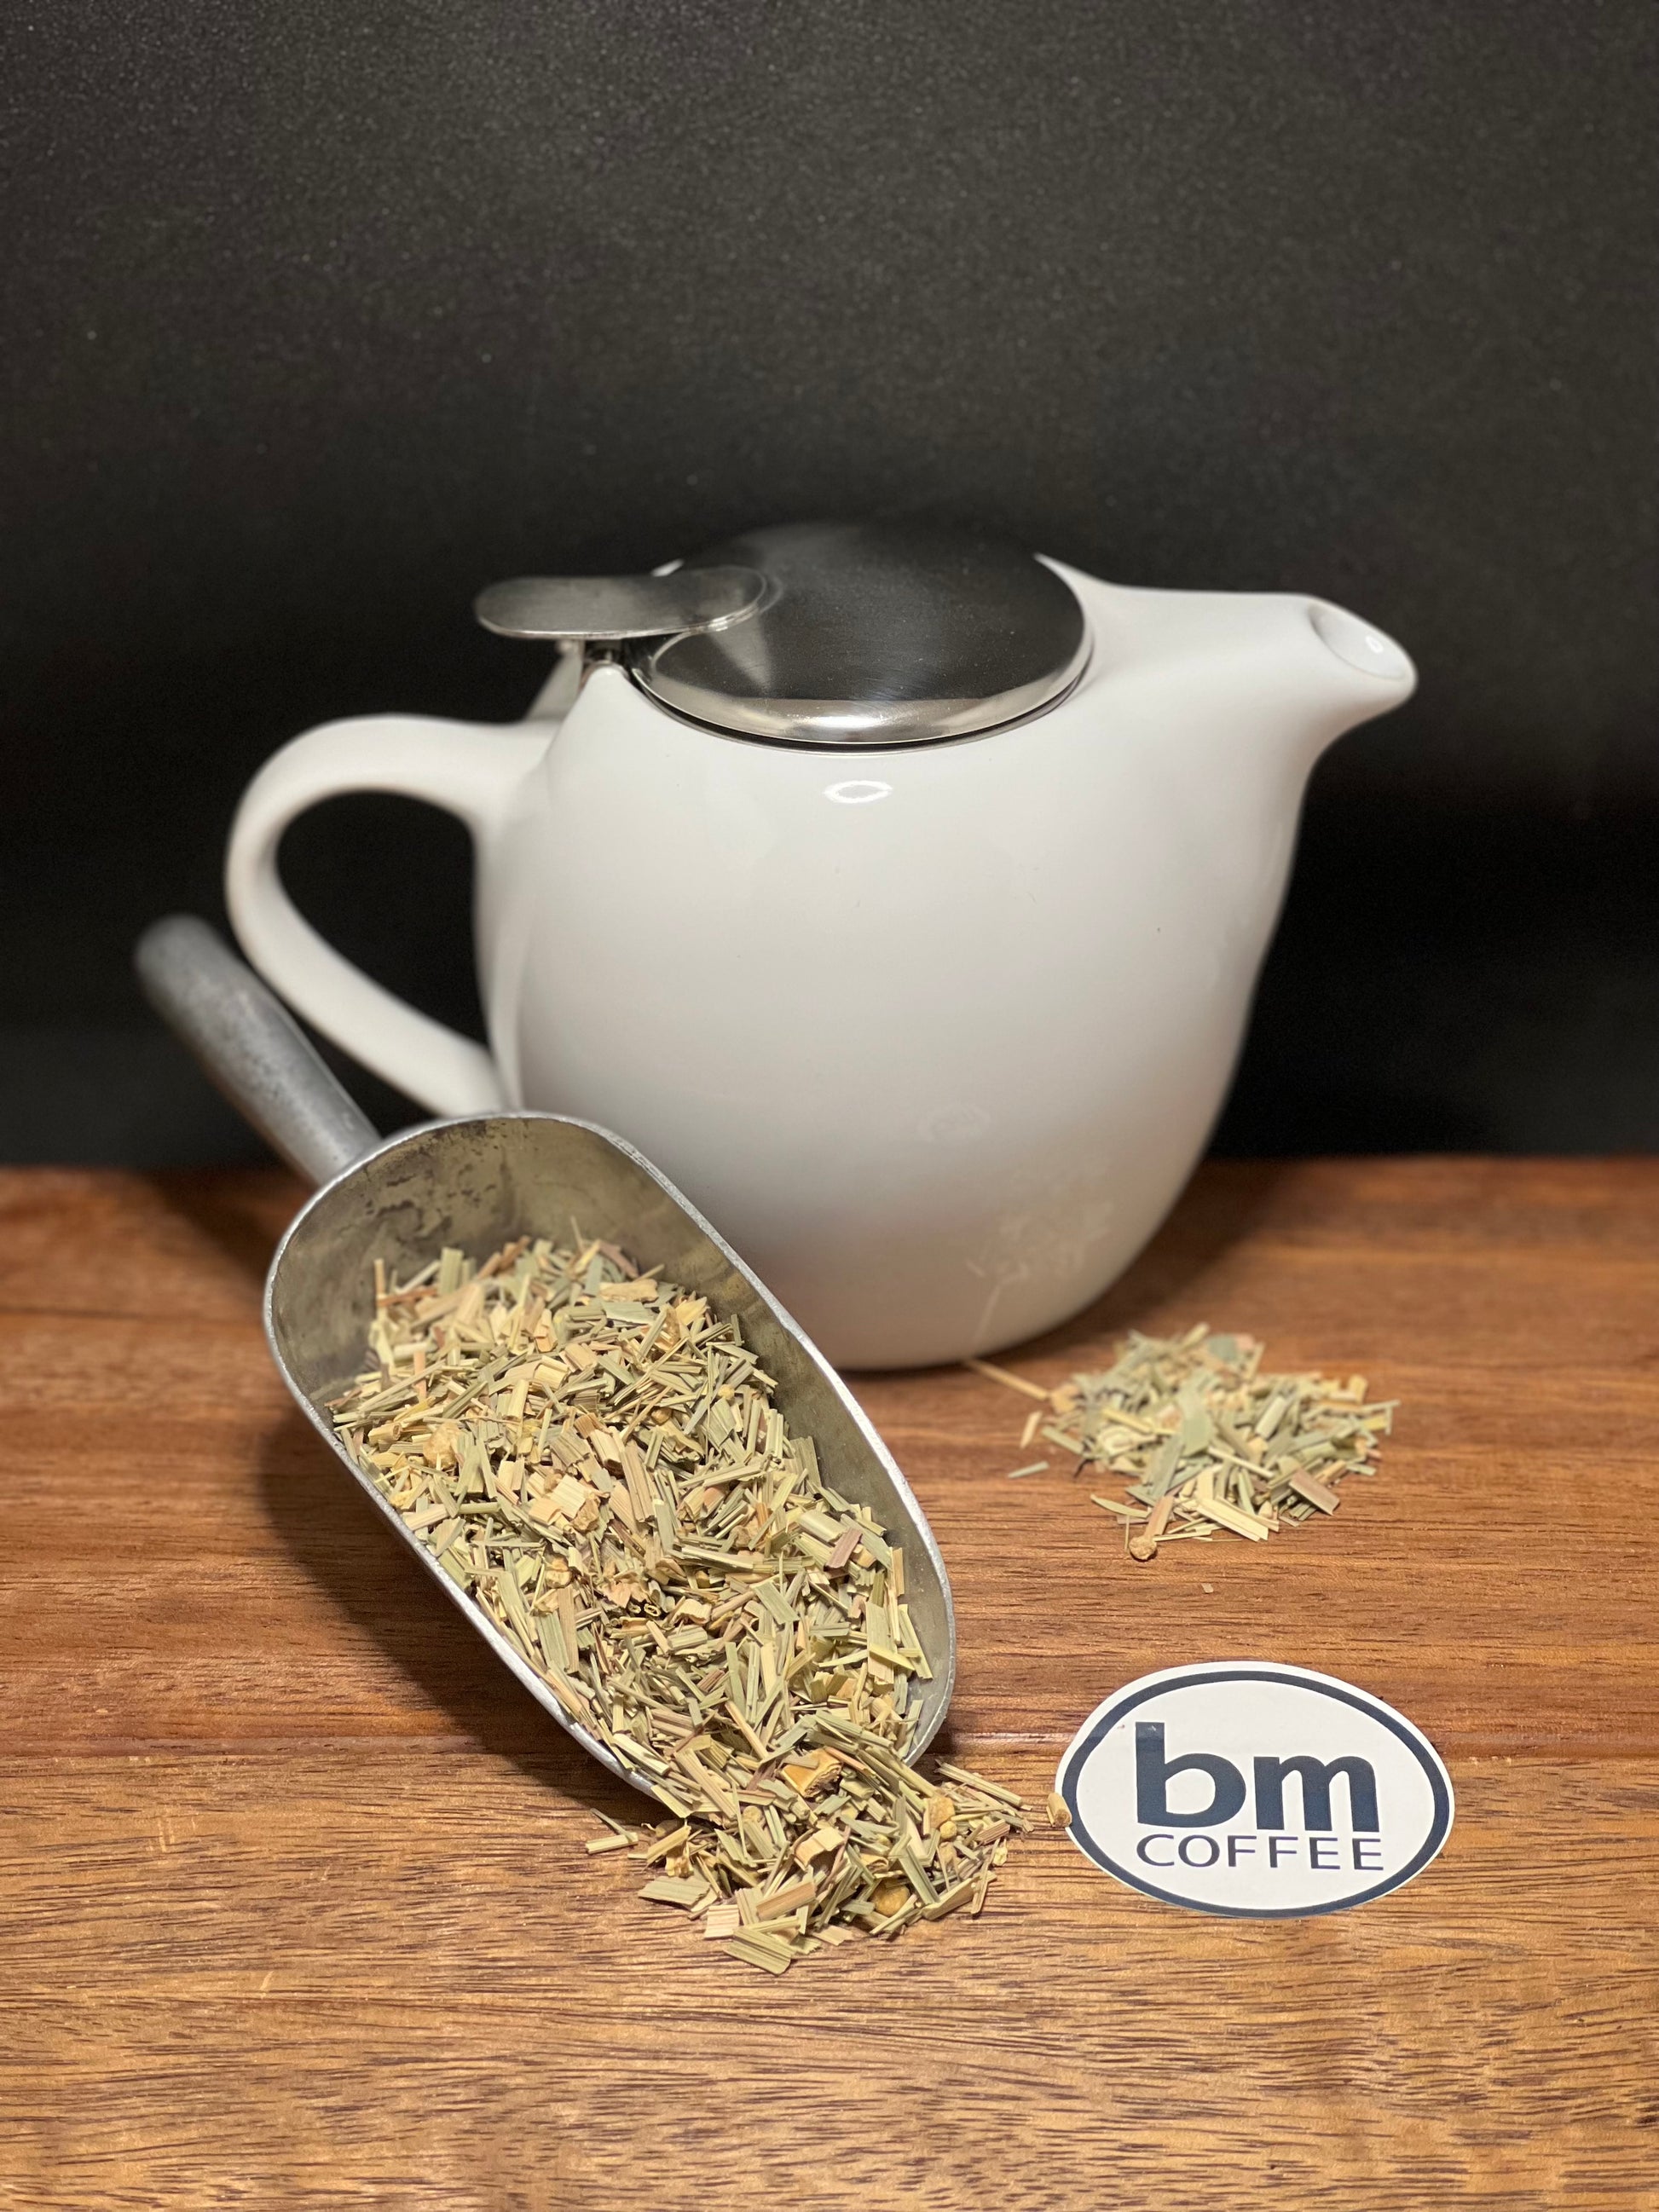 Lemongrass and Ginger Tea 100g at bmcoffee - Blue Mountains Coffee Roasters